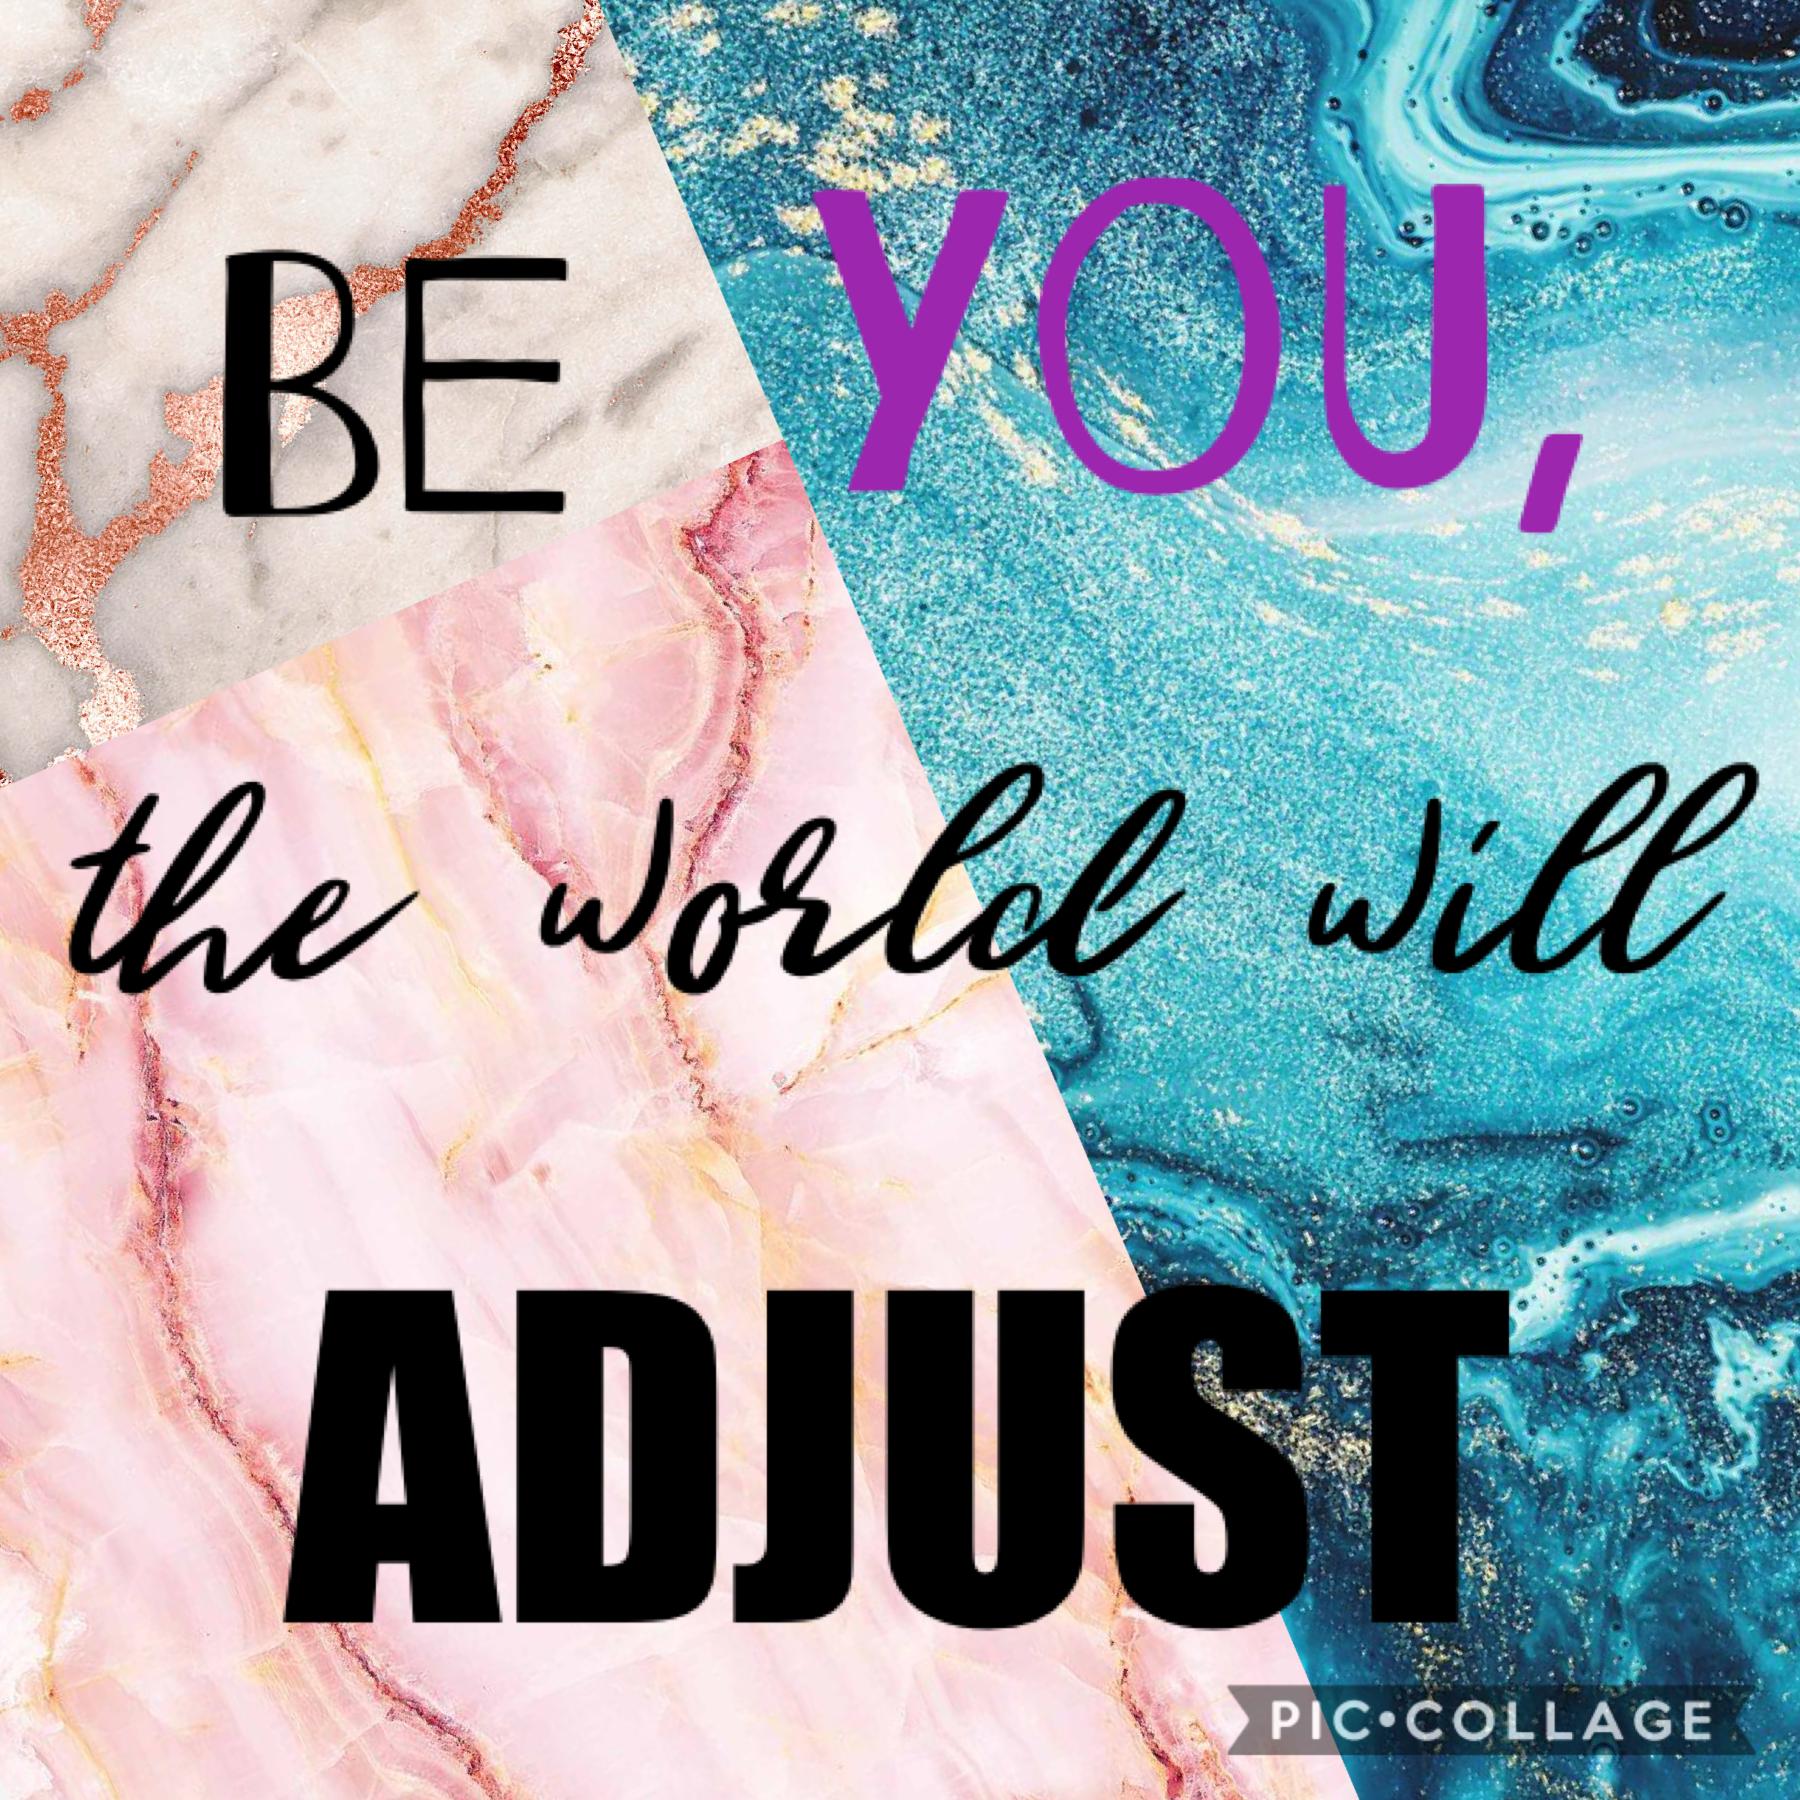 Be you, the world will adjust